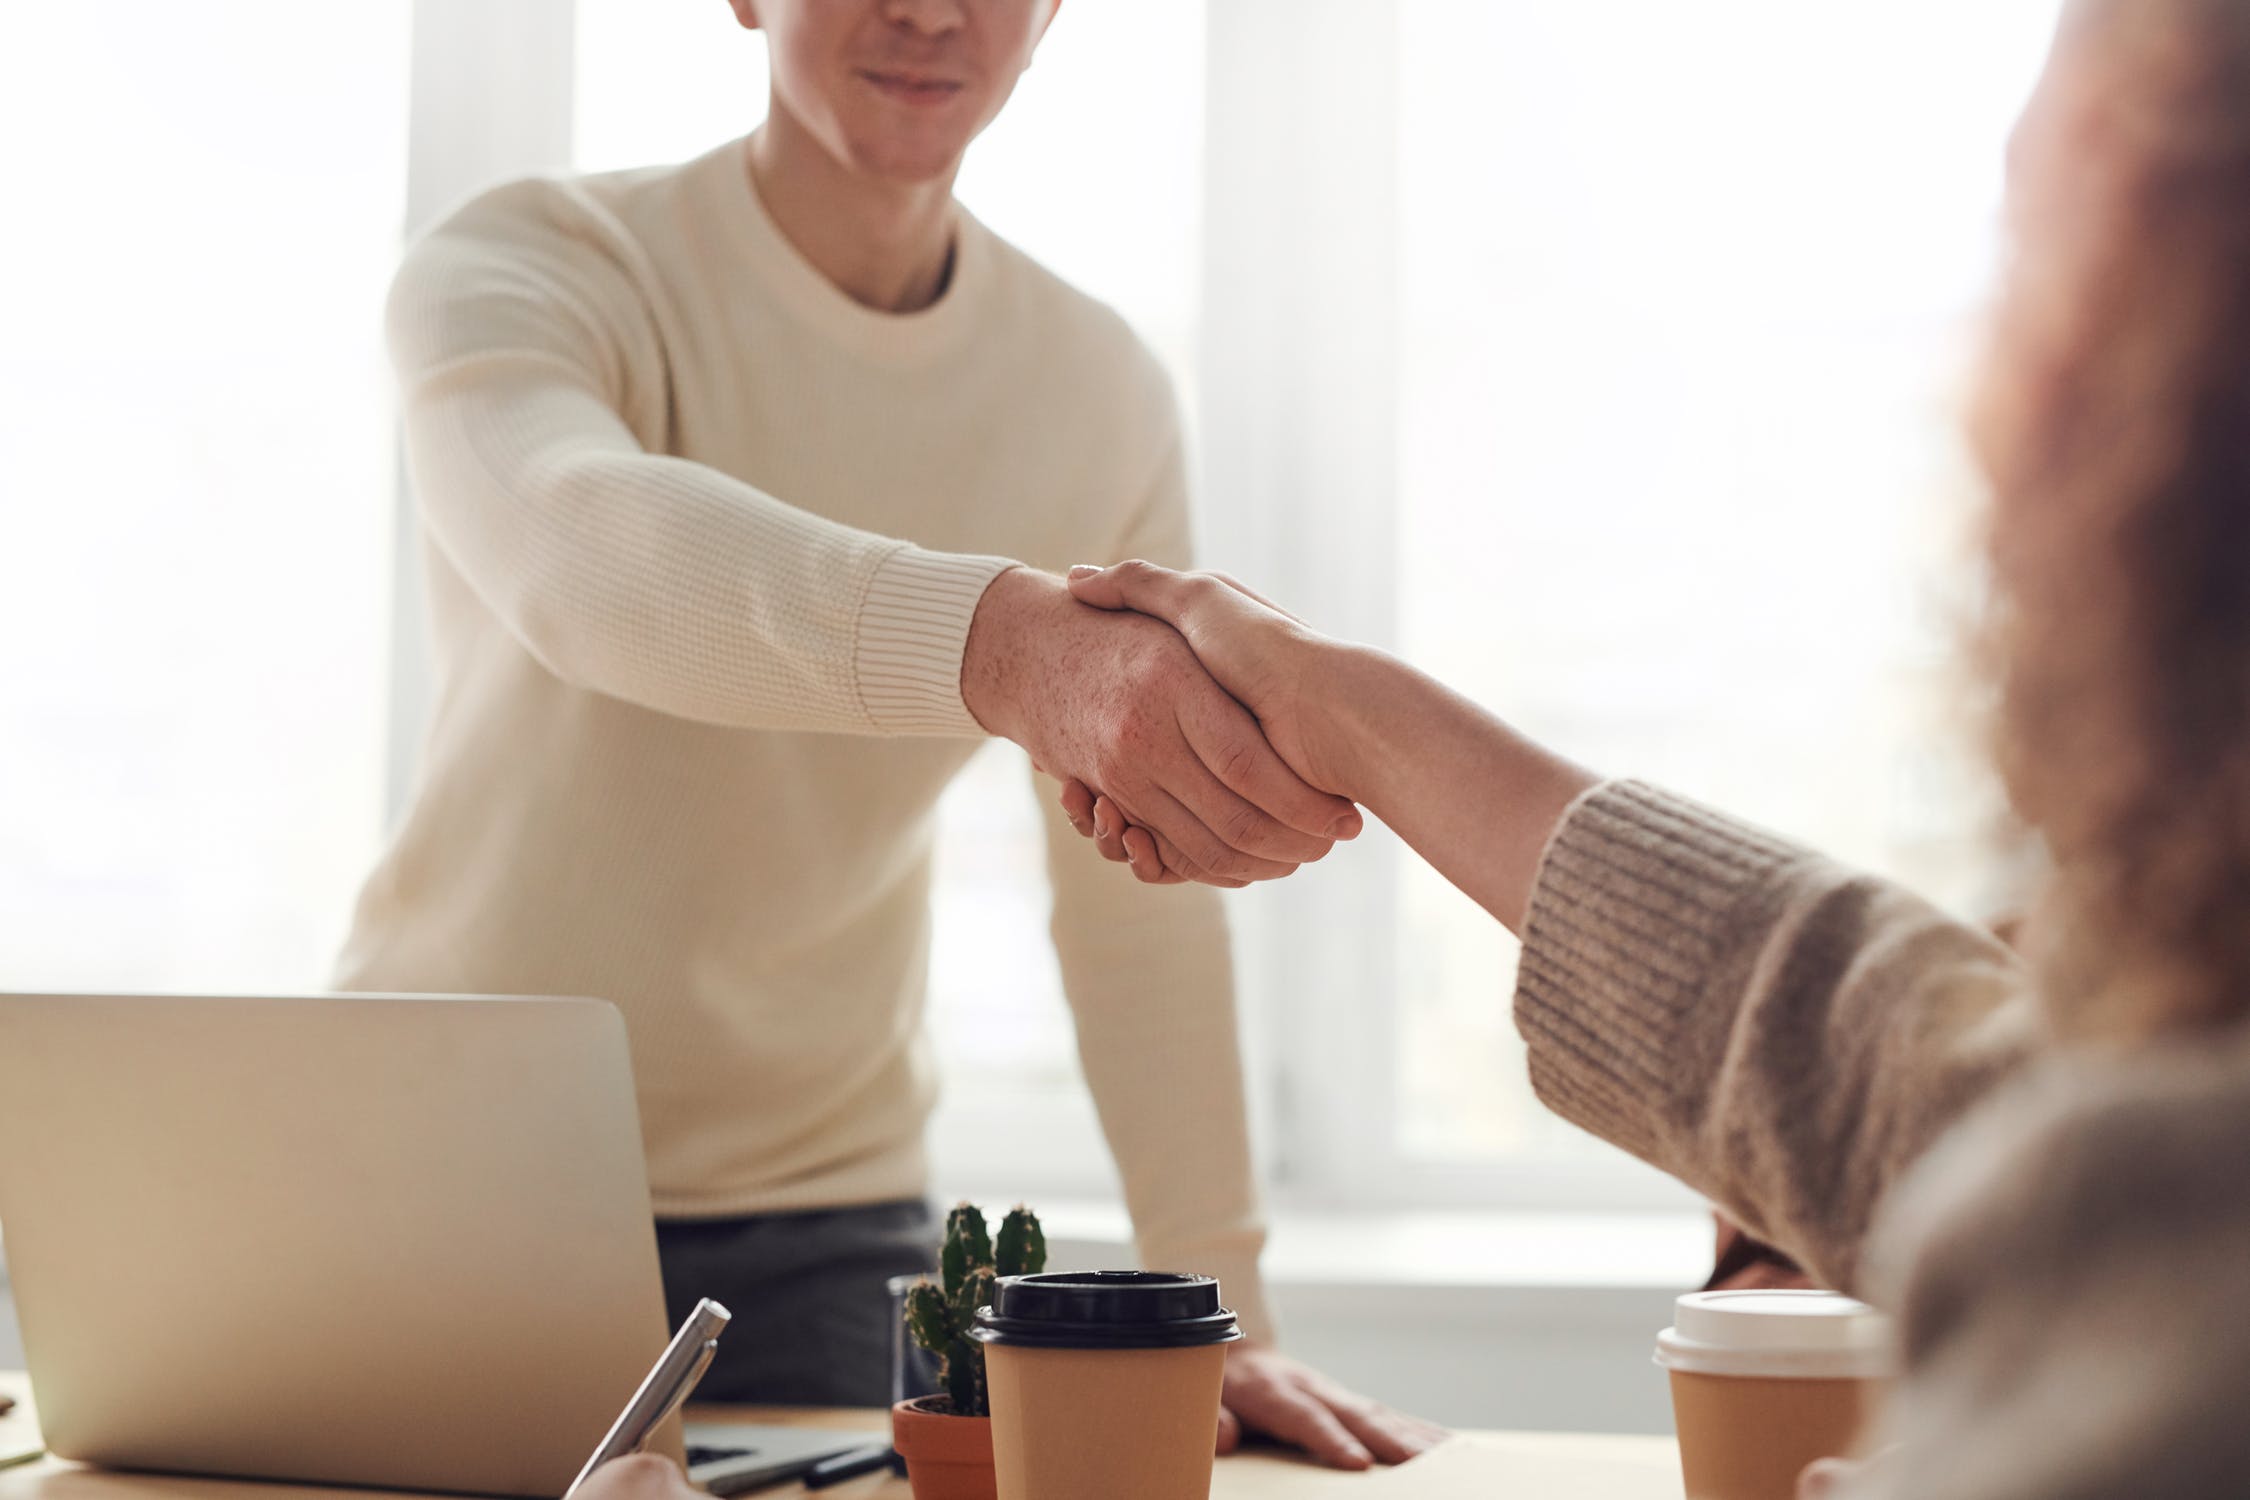 Handshake to signify successful salary negotiation